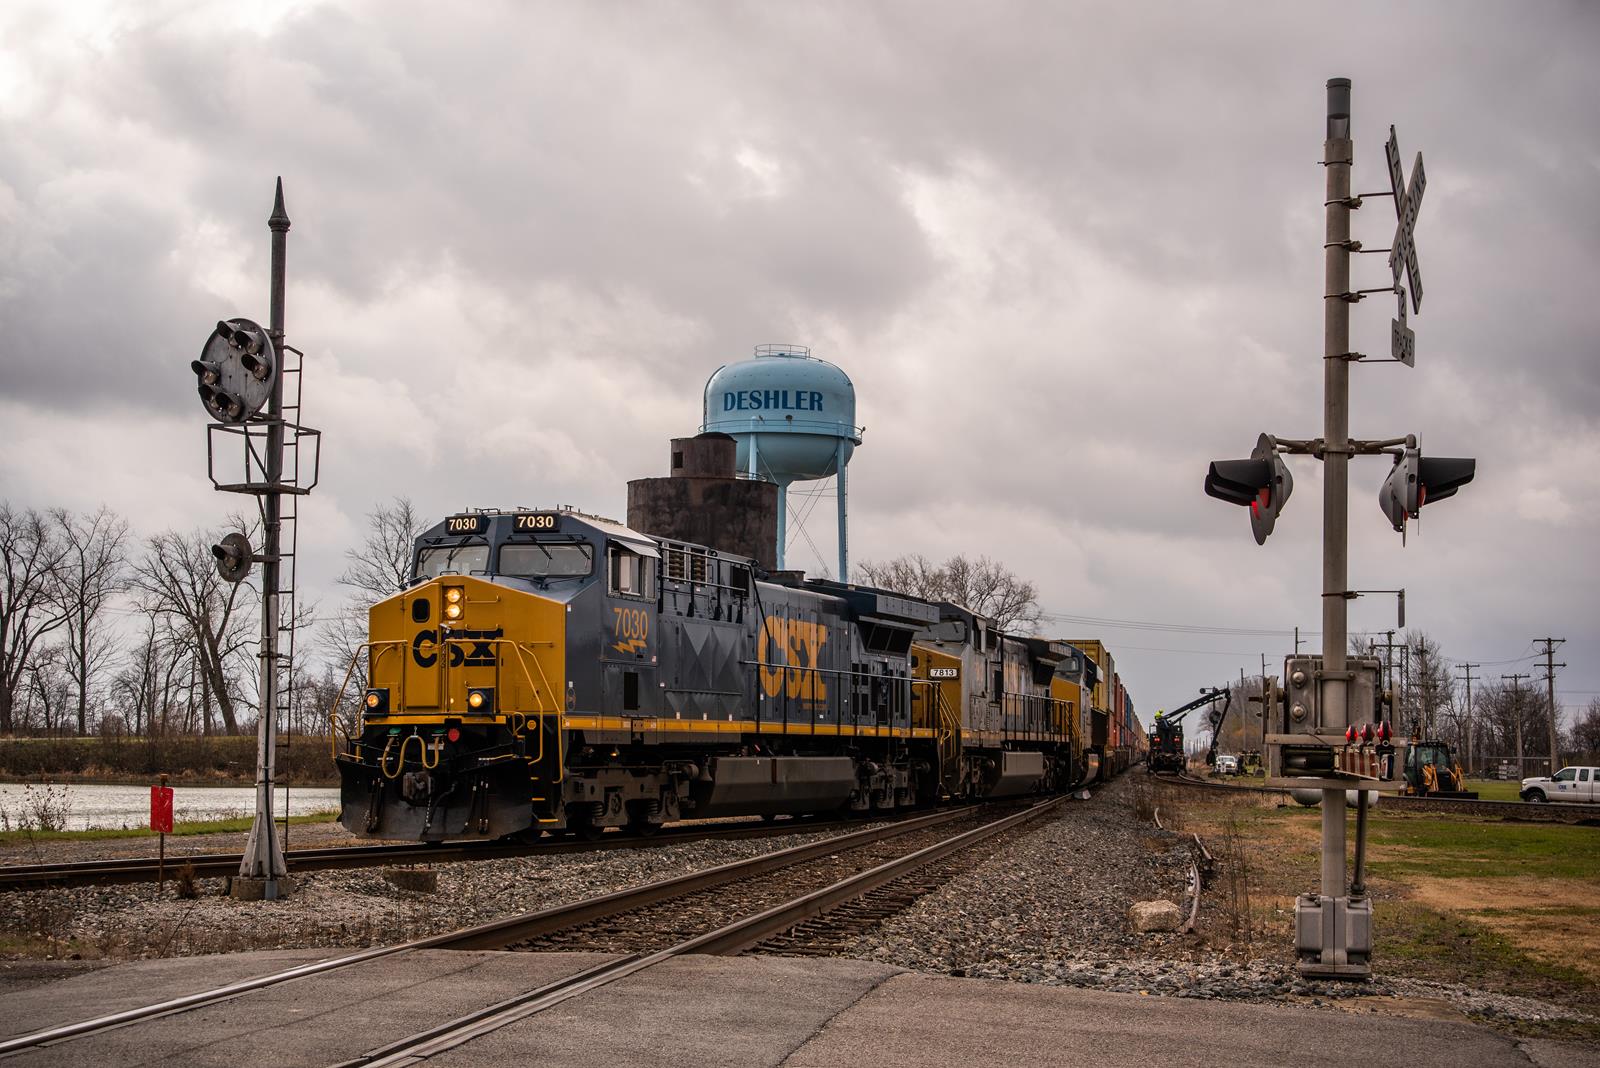 CSXT 7030 is a class GE AC4400CW and  is pictured in Deshler, Ohio, USA.  This was taken along the Toledo Subdivision on the CSX Transportation. Photo Copyright: Spencer Harman uploaded to Railroad Gallery on 11/17/2022. This photograph of CSXT 7030 was taken on Thursday, November 17, 2022. All Rights Reserved. 